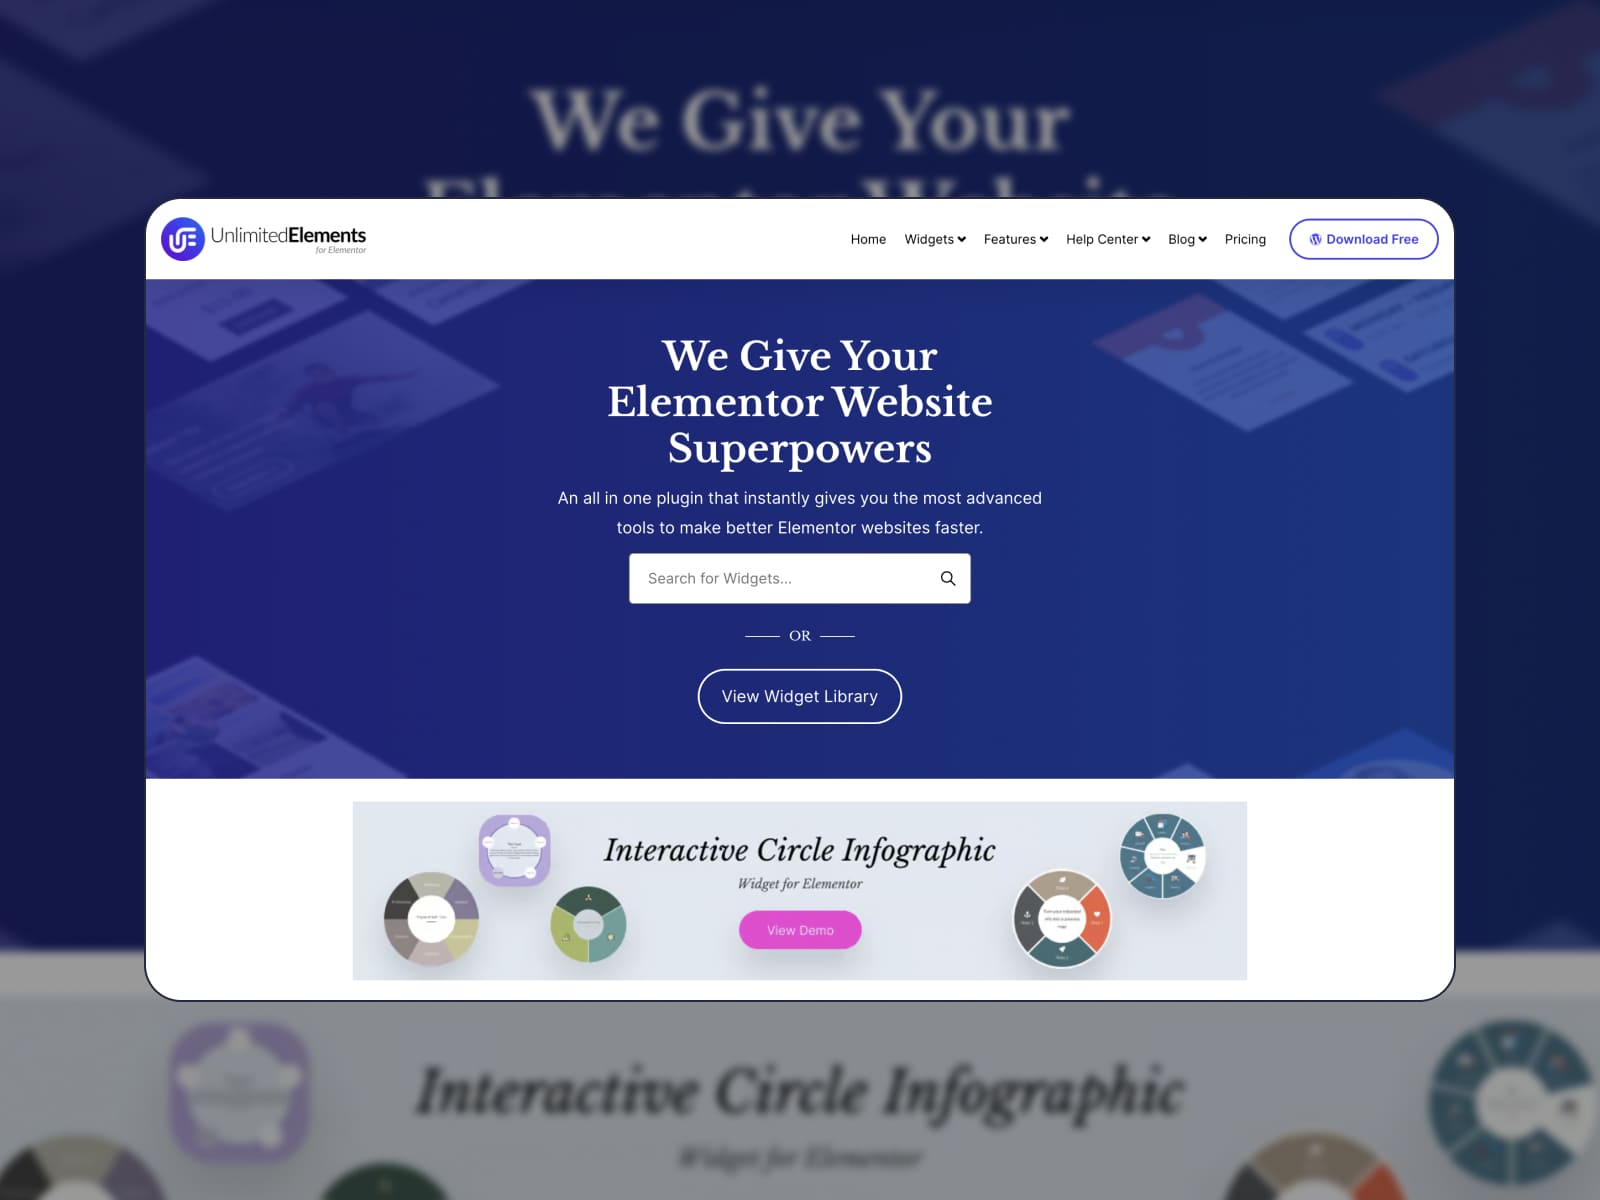 The Unlimited Elements PRO landing page.